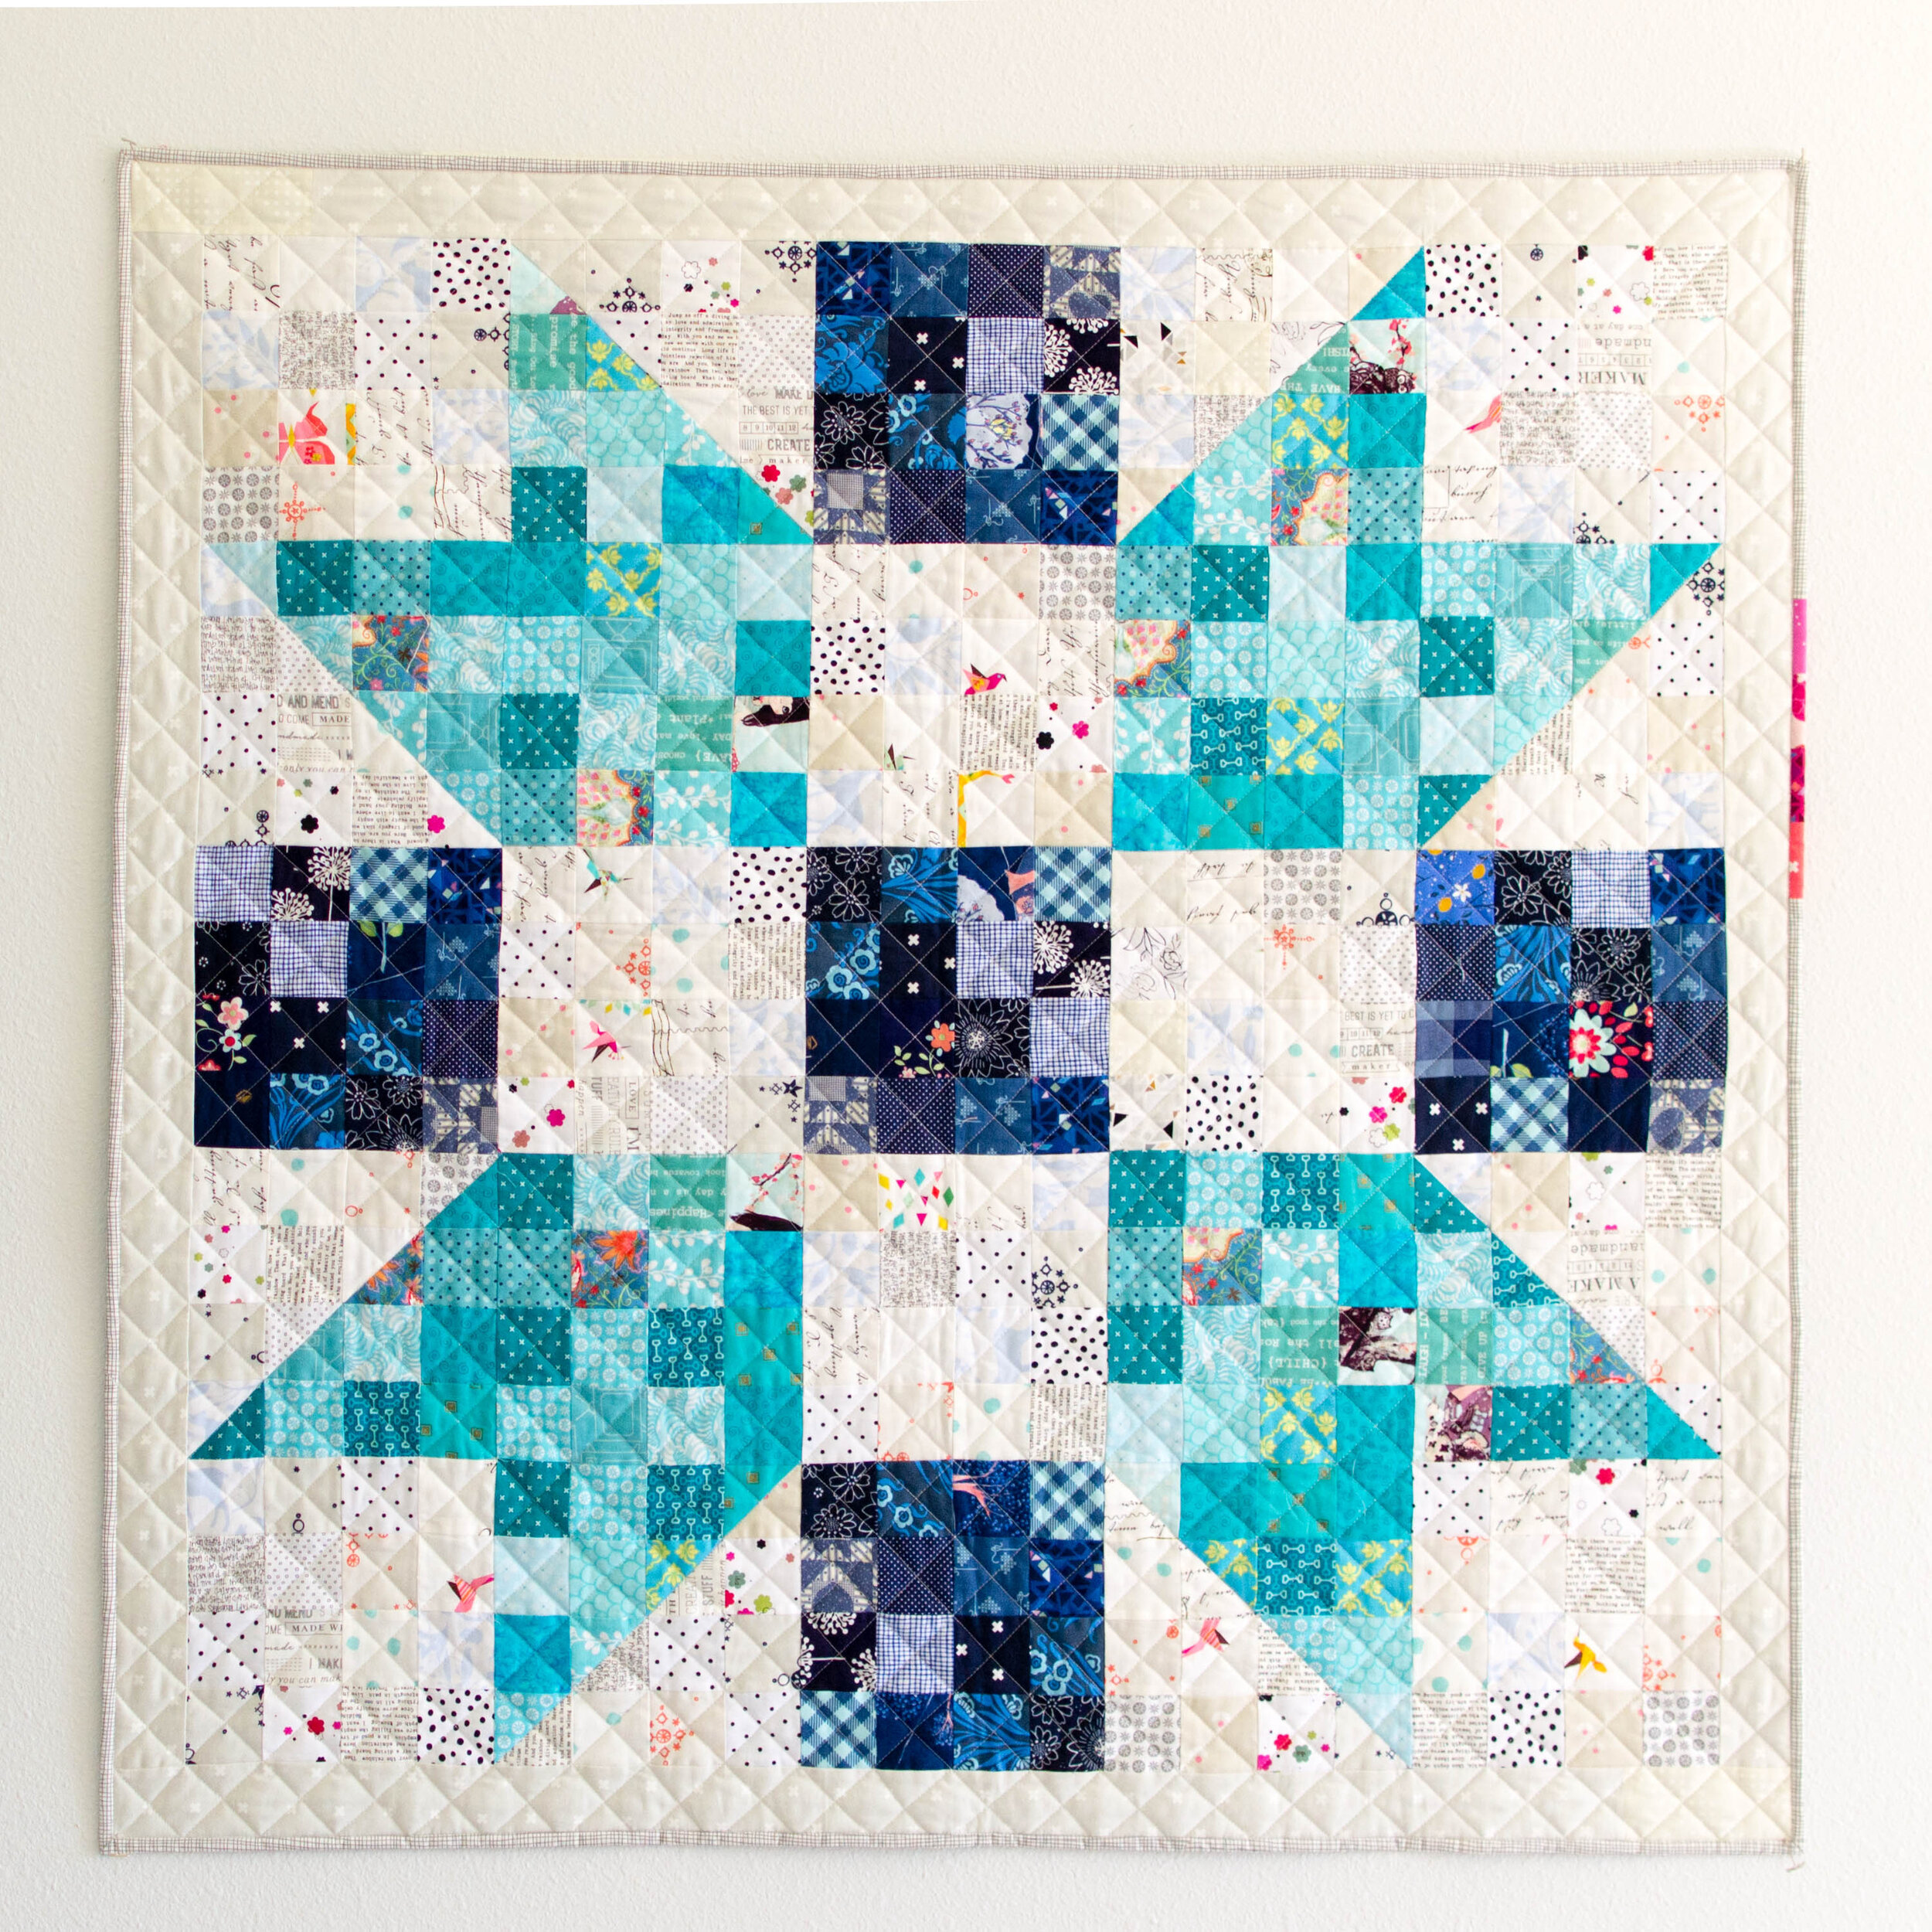 how-to-do-cross-hatch-quilting-tutorial-using-a-walking-foot-sewcanshe-free-sewing-patterns-for-beginners